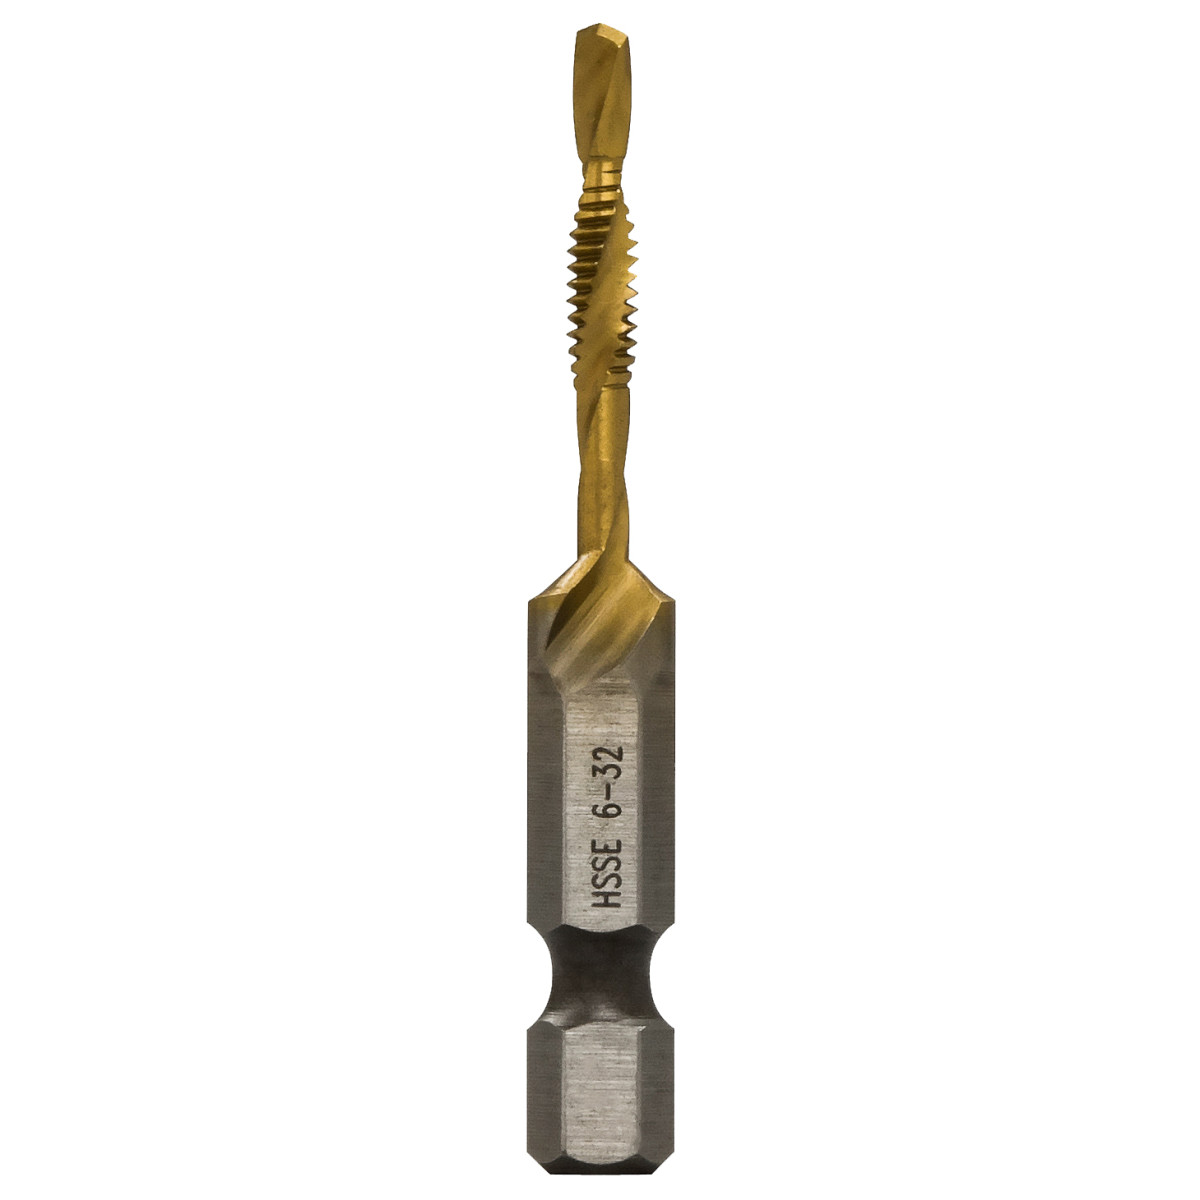 6-32 Split-point tip resists walking and penetrates material faster. Strong, high-speed steel provides superior resistance to heat and abrasion. Titanium Nitride coating ensures that the bits run cooler, drill faster, and last longer. Optimized core for significantly reduced torque on the user and extended tool life. Designed to drill in up to 1/4